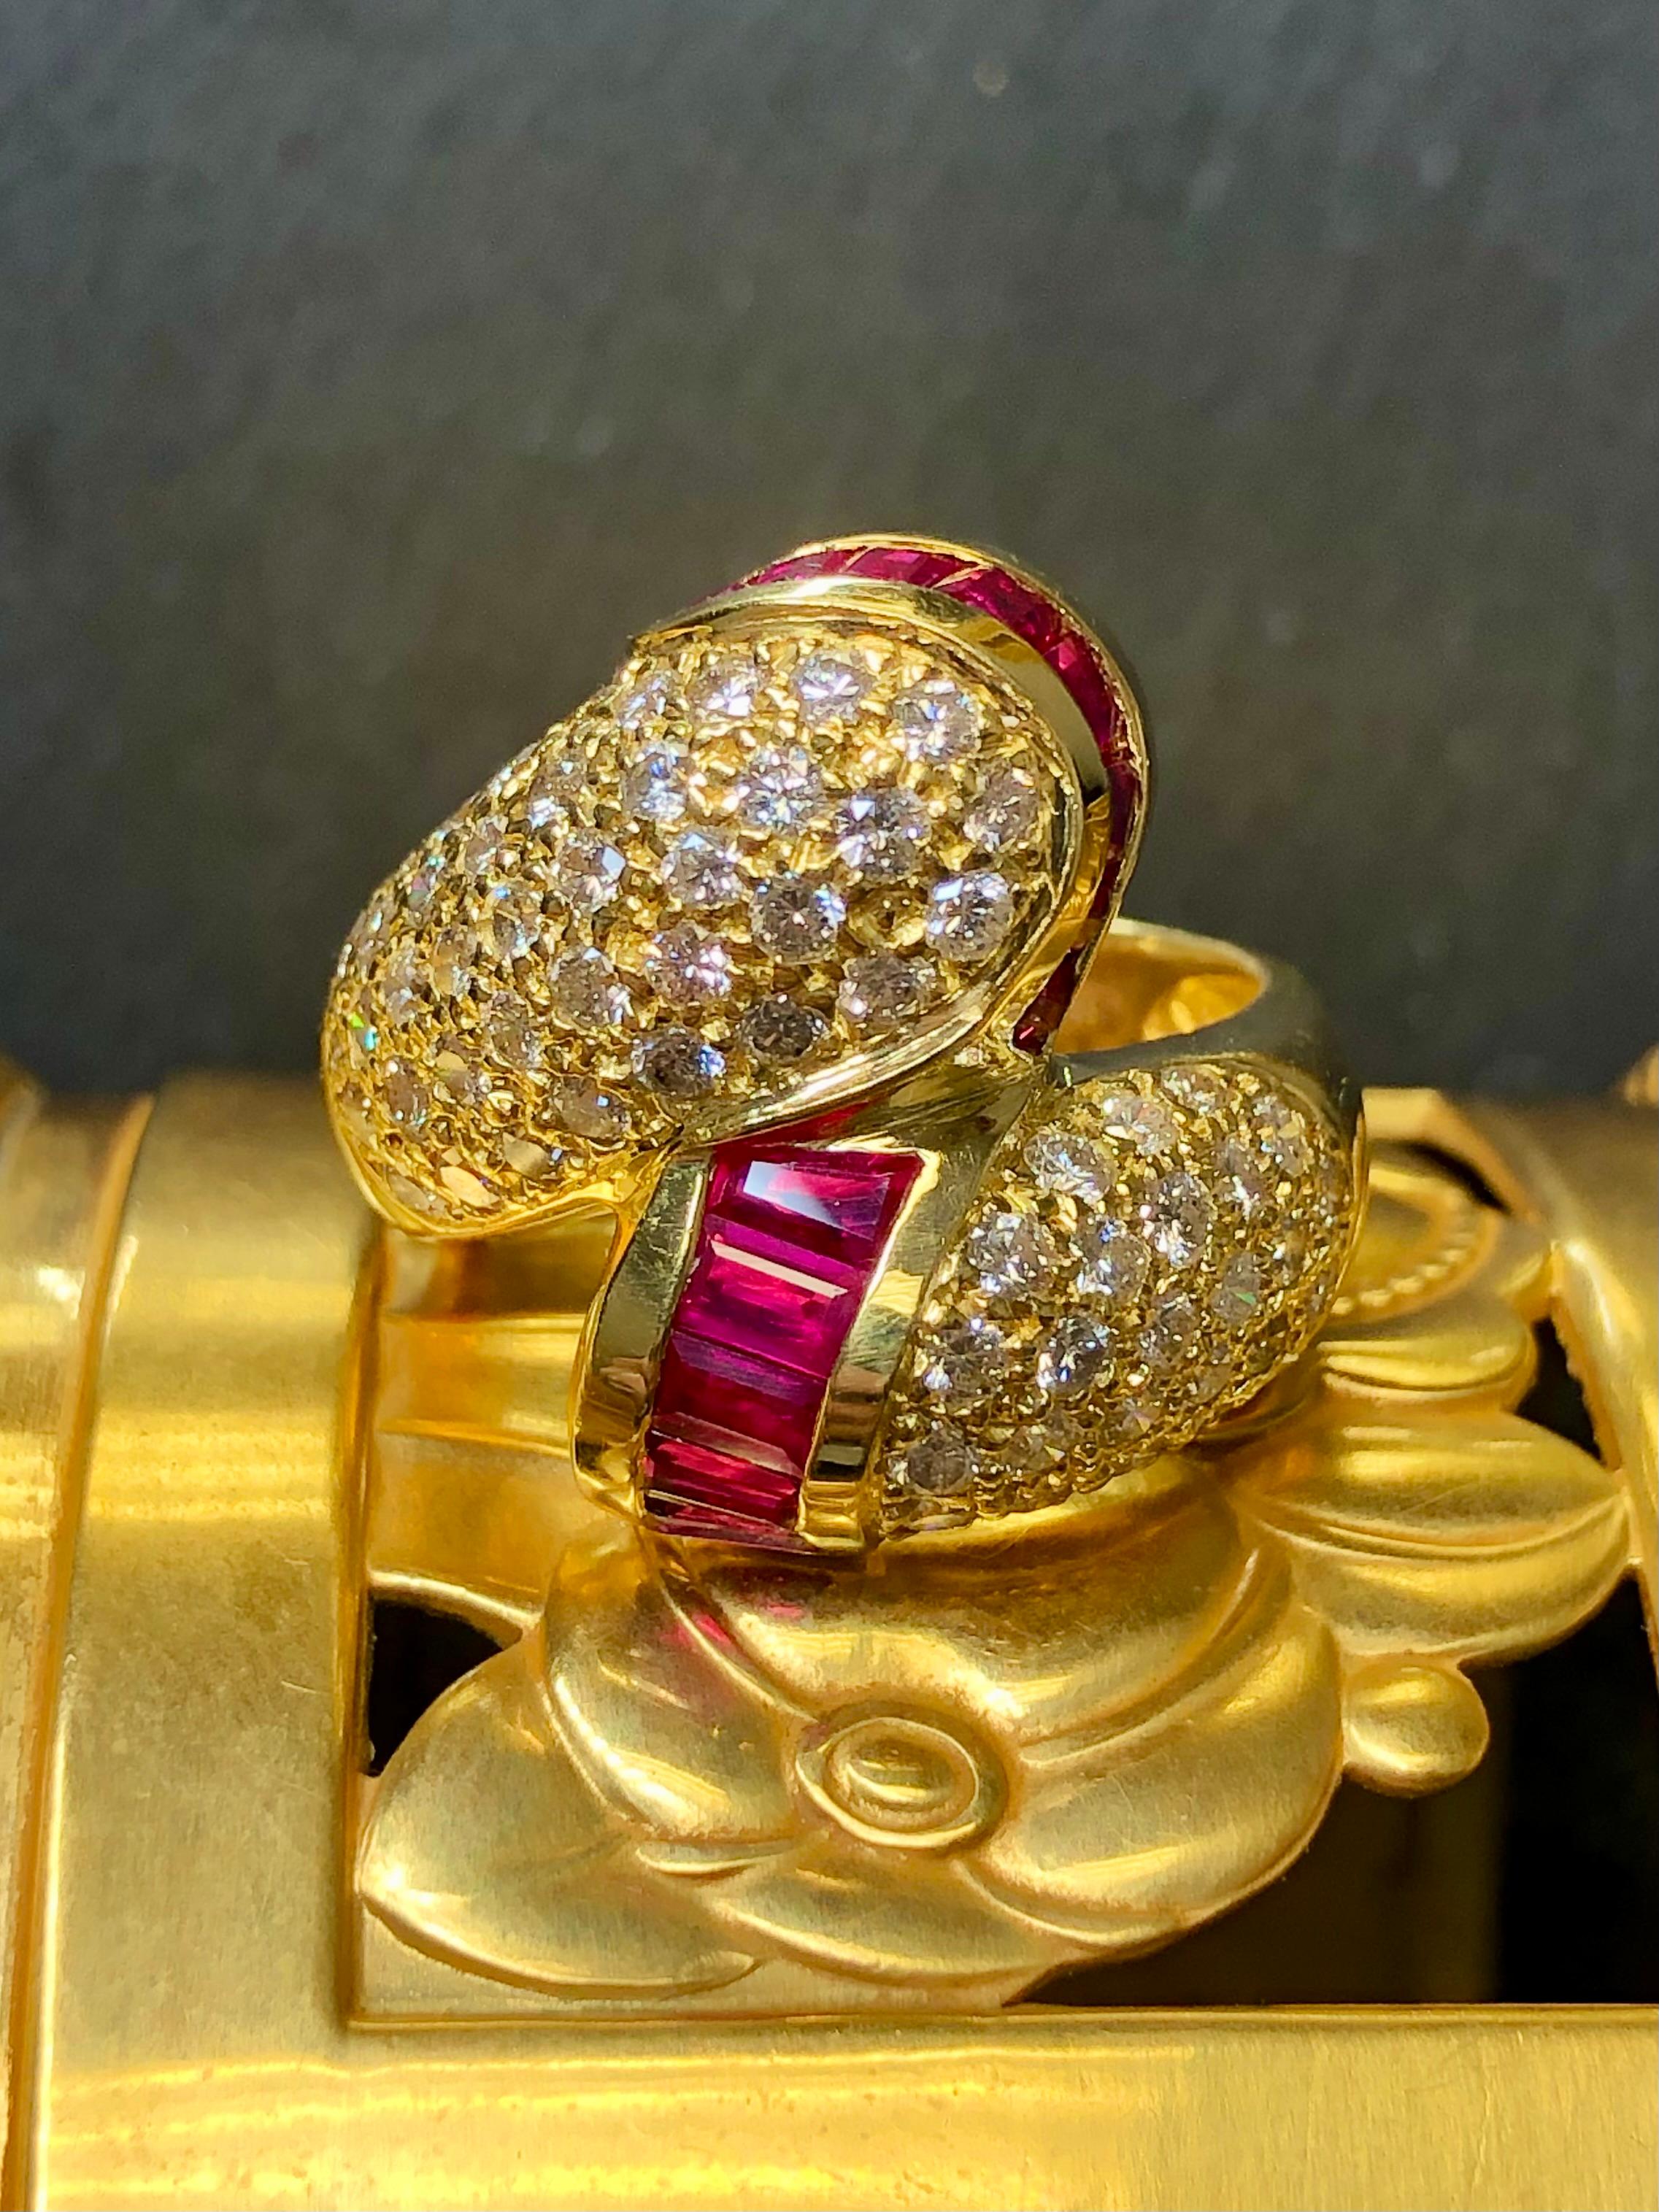 
A gorgeous vintage bypass ring from one of the most bold periods in the jewelry world… c. the 1980’s - 1990’s. It is crafted in 18K yellow gold and pave set with approximately 2.20cttw in H-I color Vs2-Si1 clarity rounds diamonds and channel set